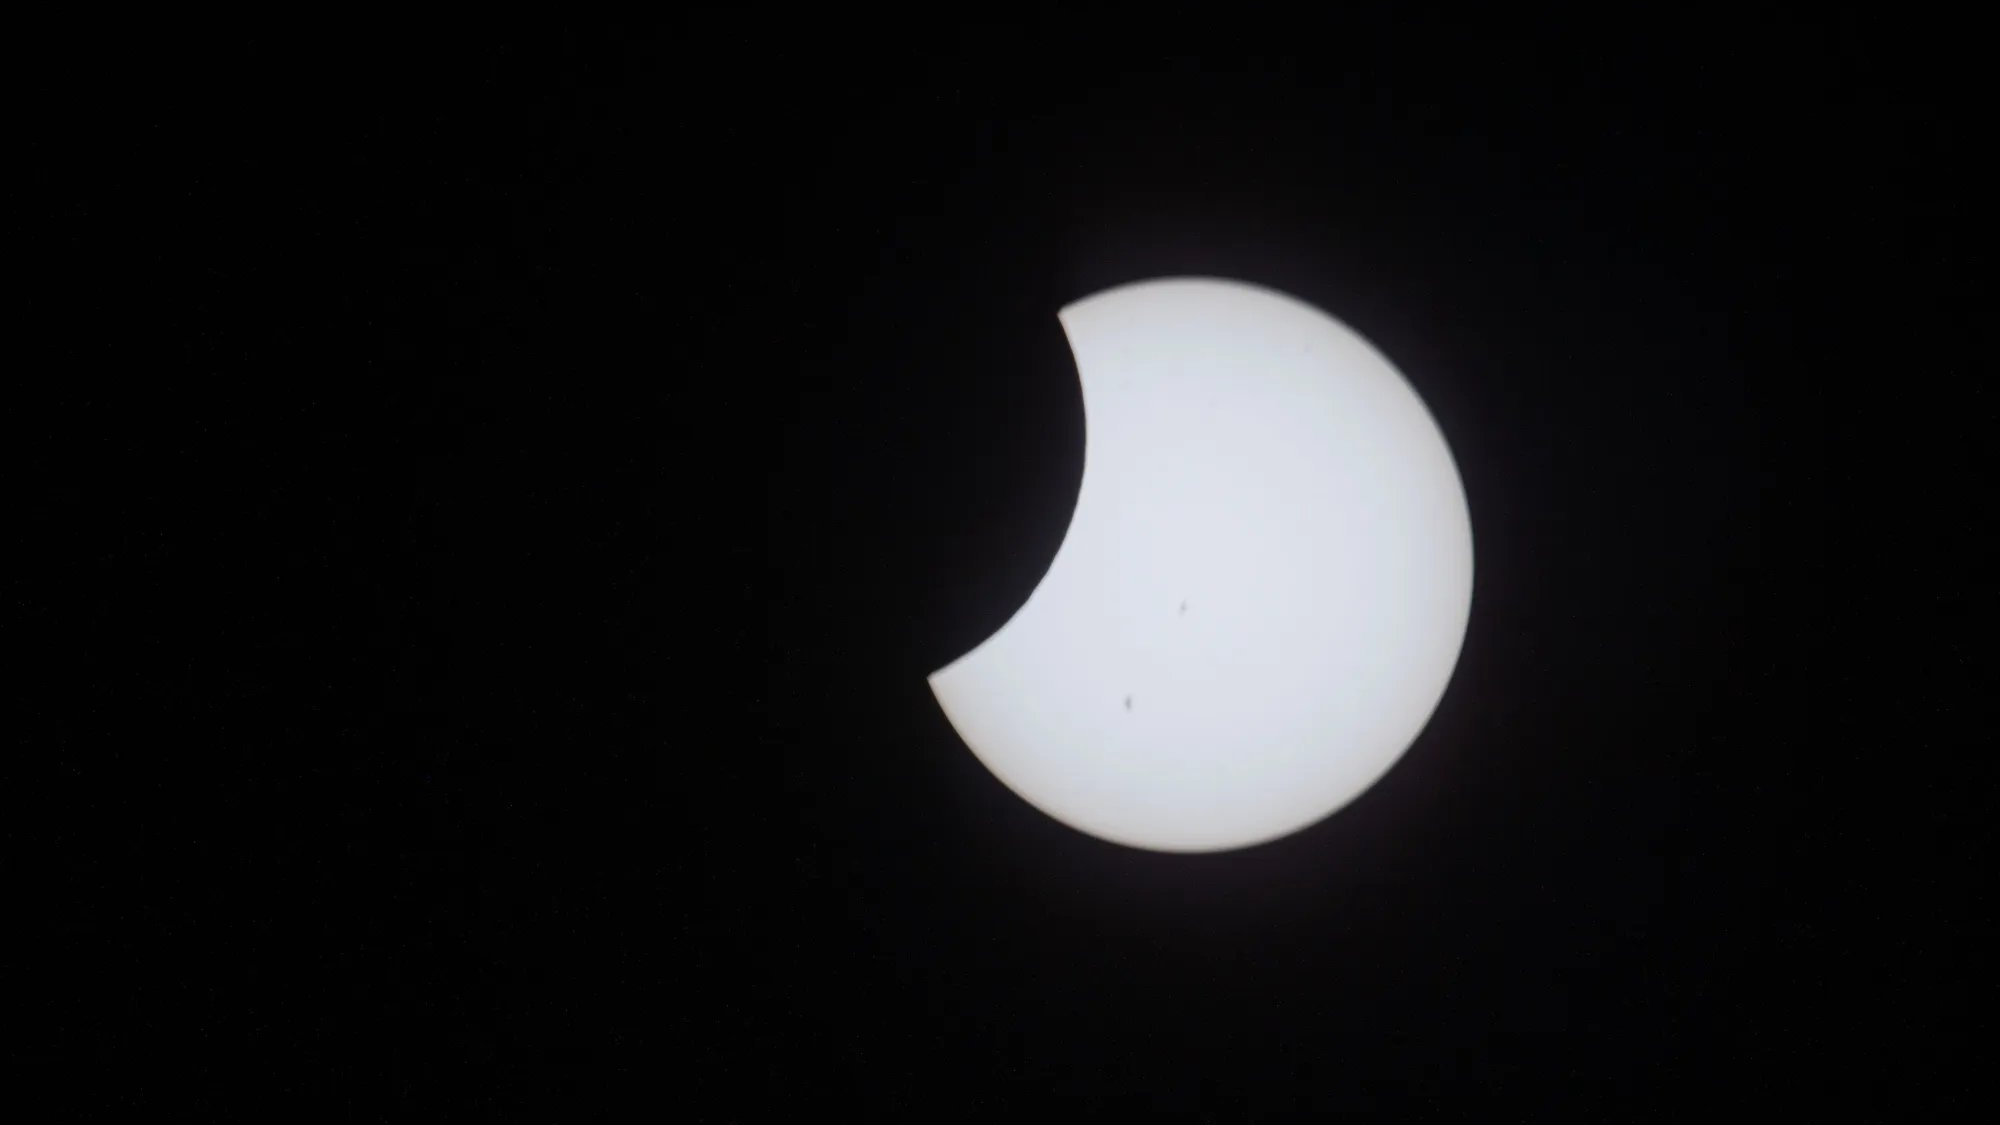 a solar eclipse in progress with the moon starting to cover part of the sun